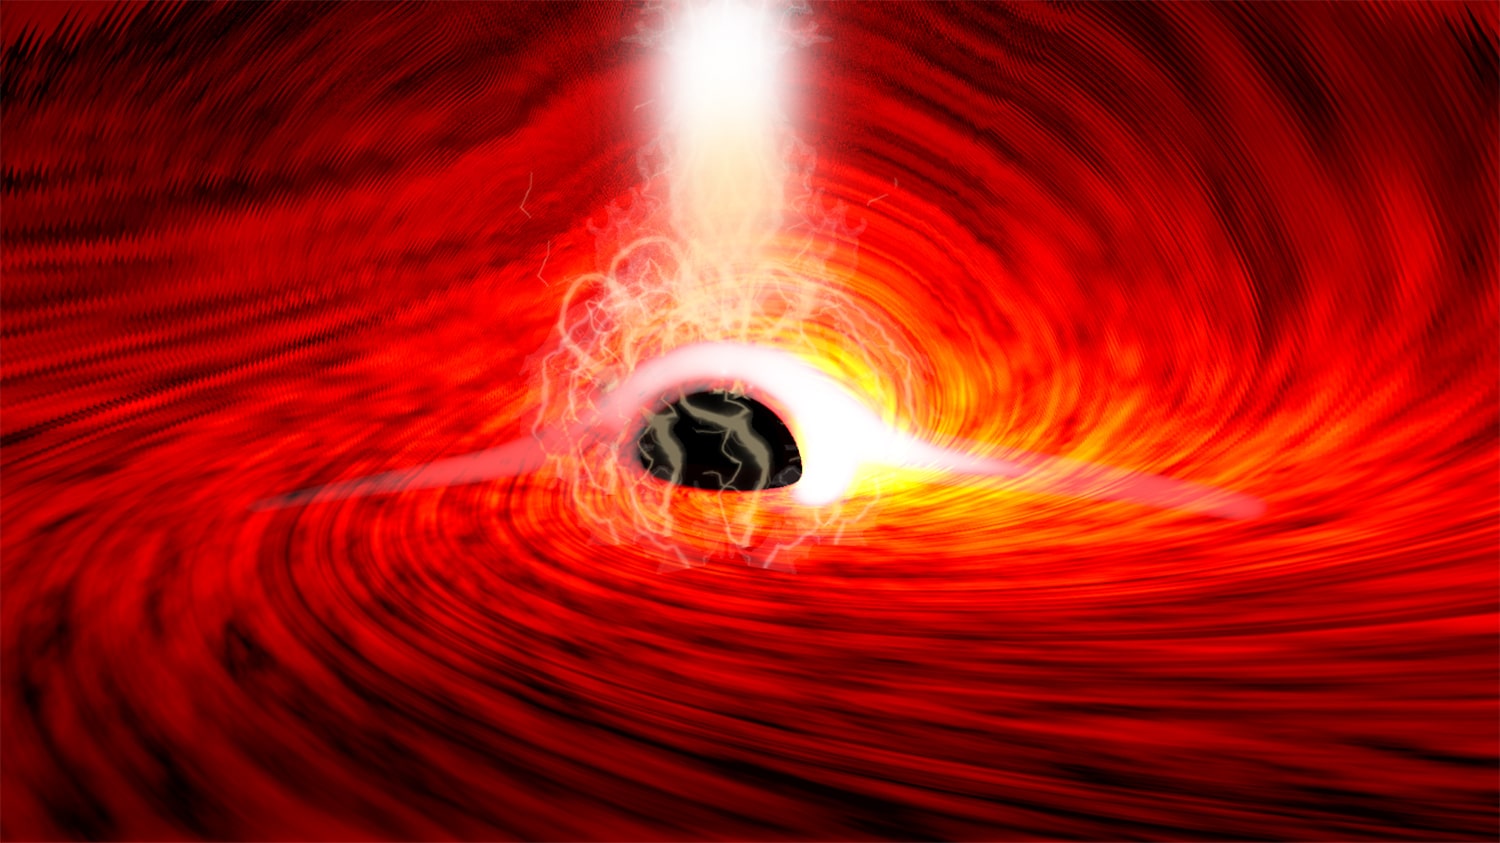 Intriguing: First-ever recordings of light from the far side of a black hole thumbnail